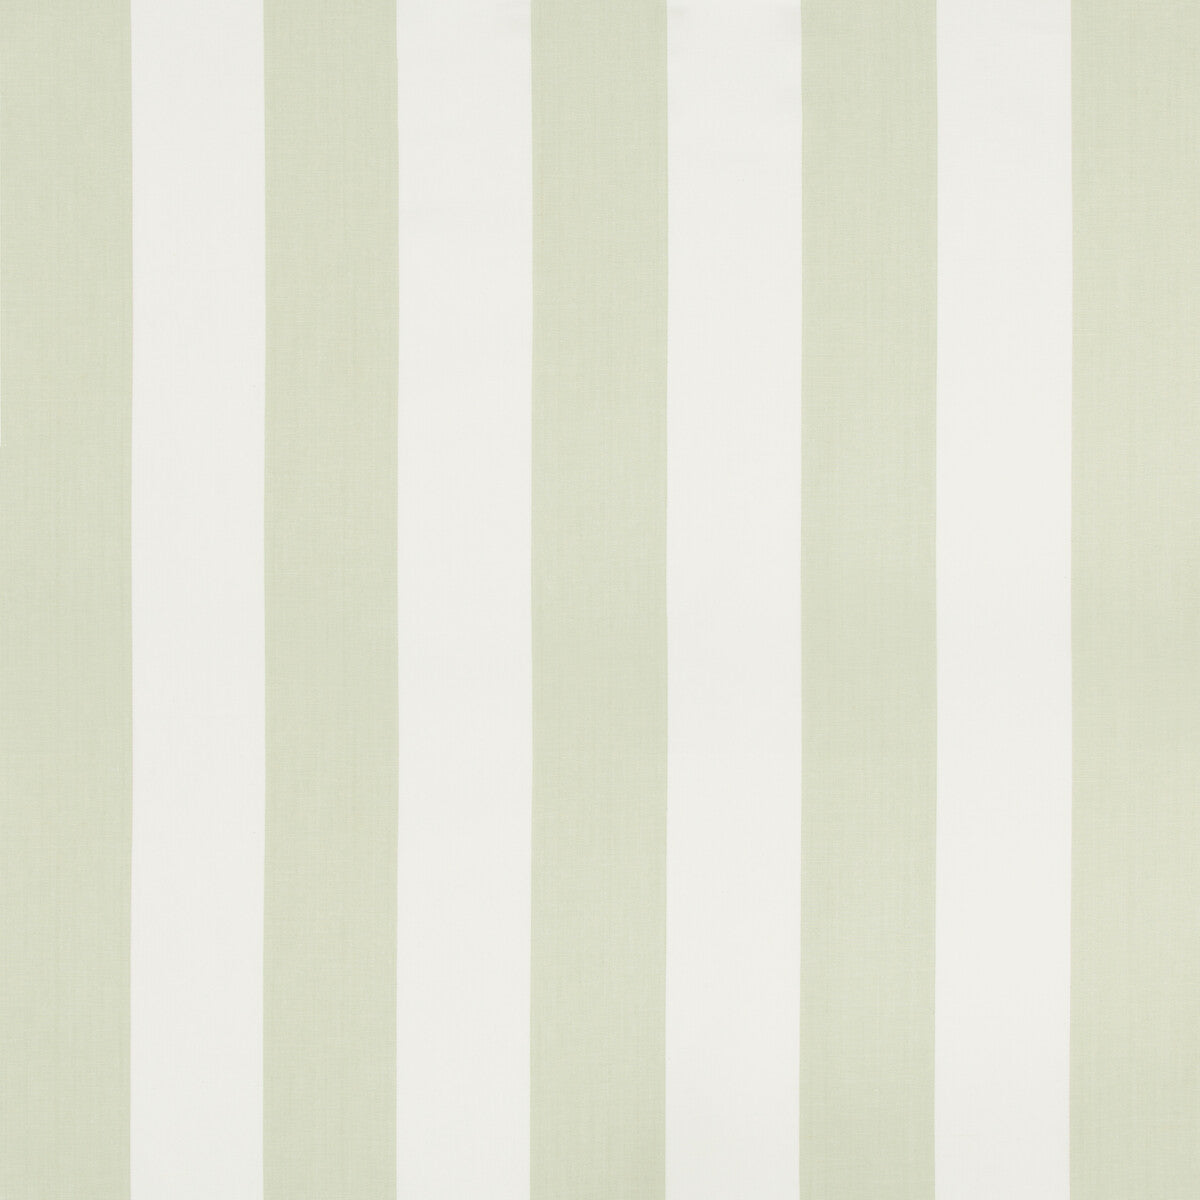 St Croix Stripe fabric in leaf color - pattern 2018145.123.0 - by Lee Jofa in the Suzanne Kasler The Riviera collection